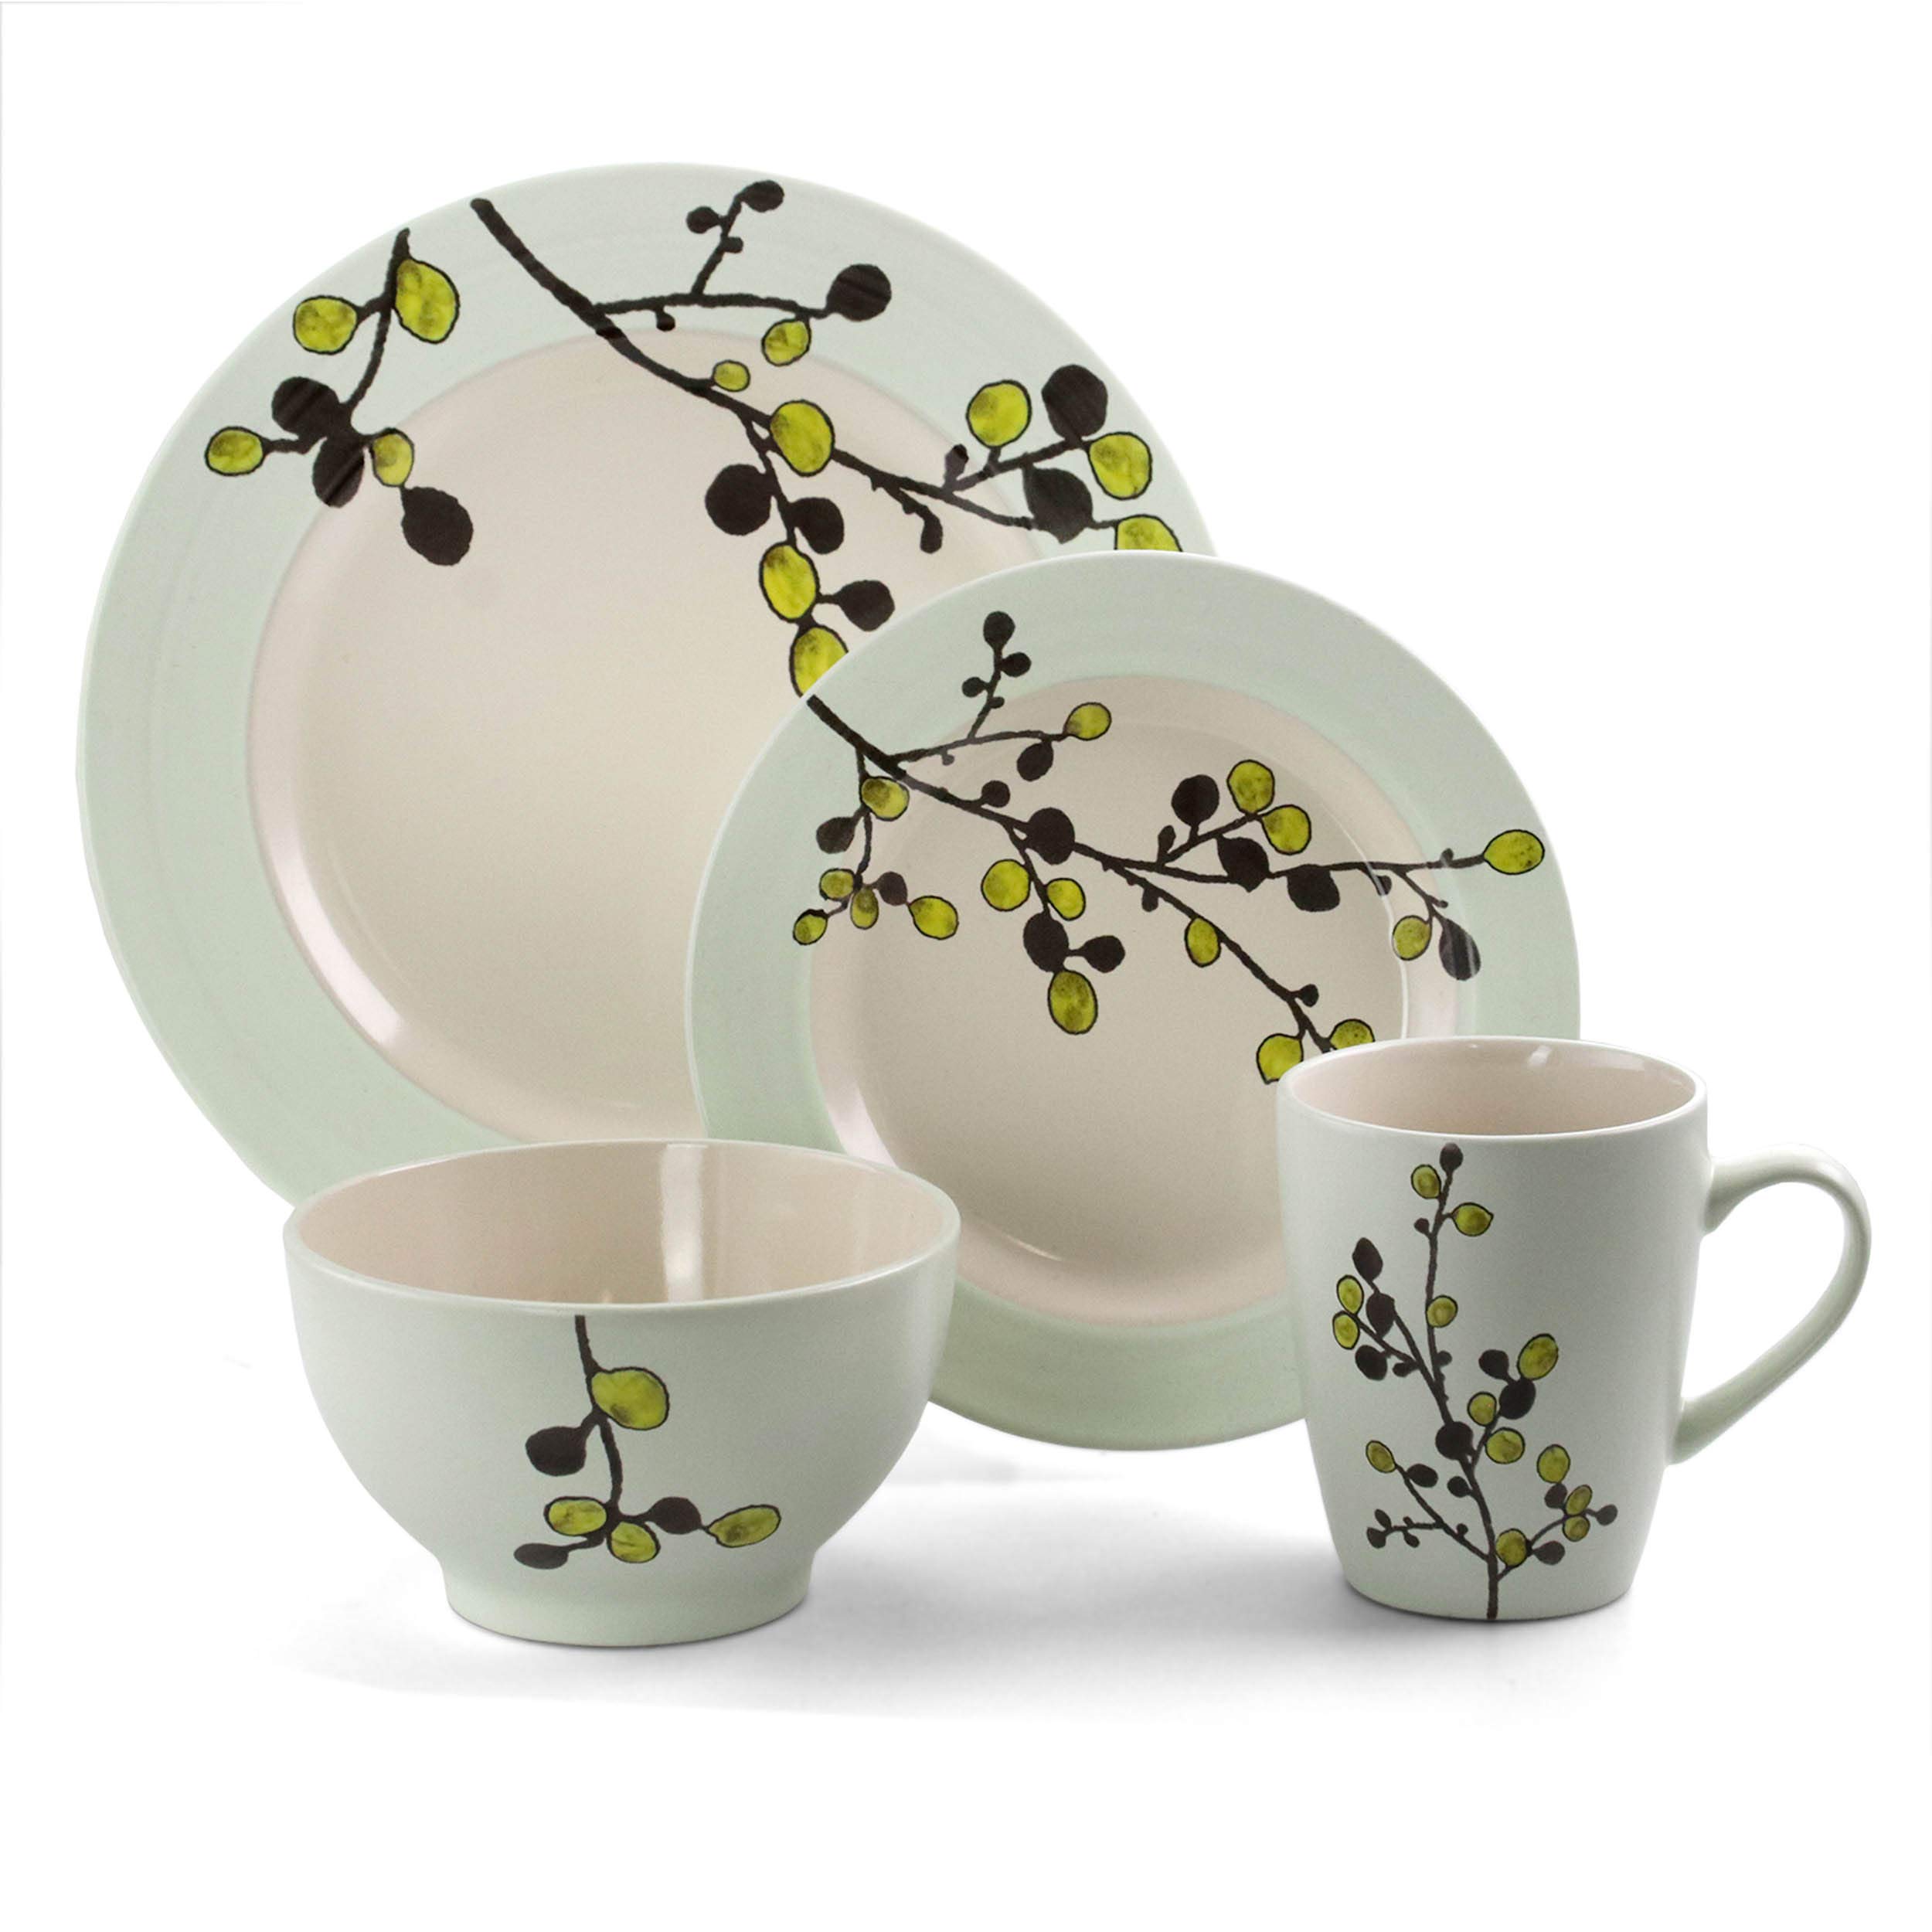 Elama RETROBLOOM Retro Bloom 16 Piece Luxurious Stoneware Dinnerware with Complete Setting for 4, Green